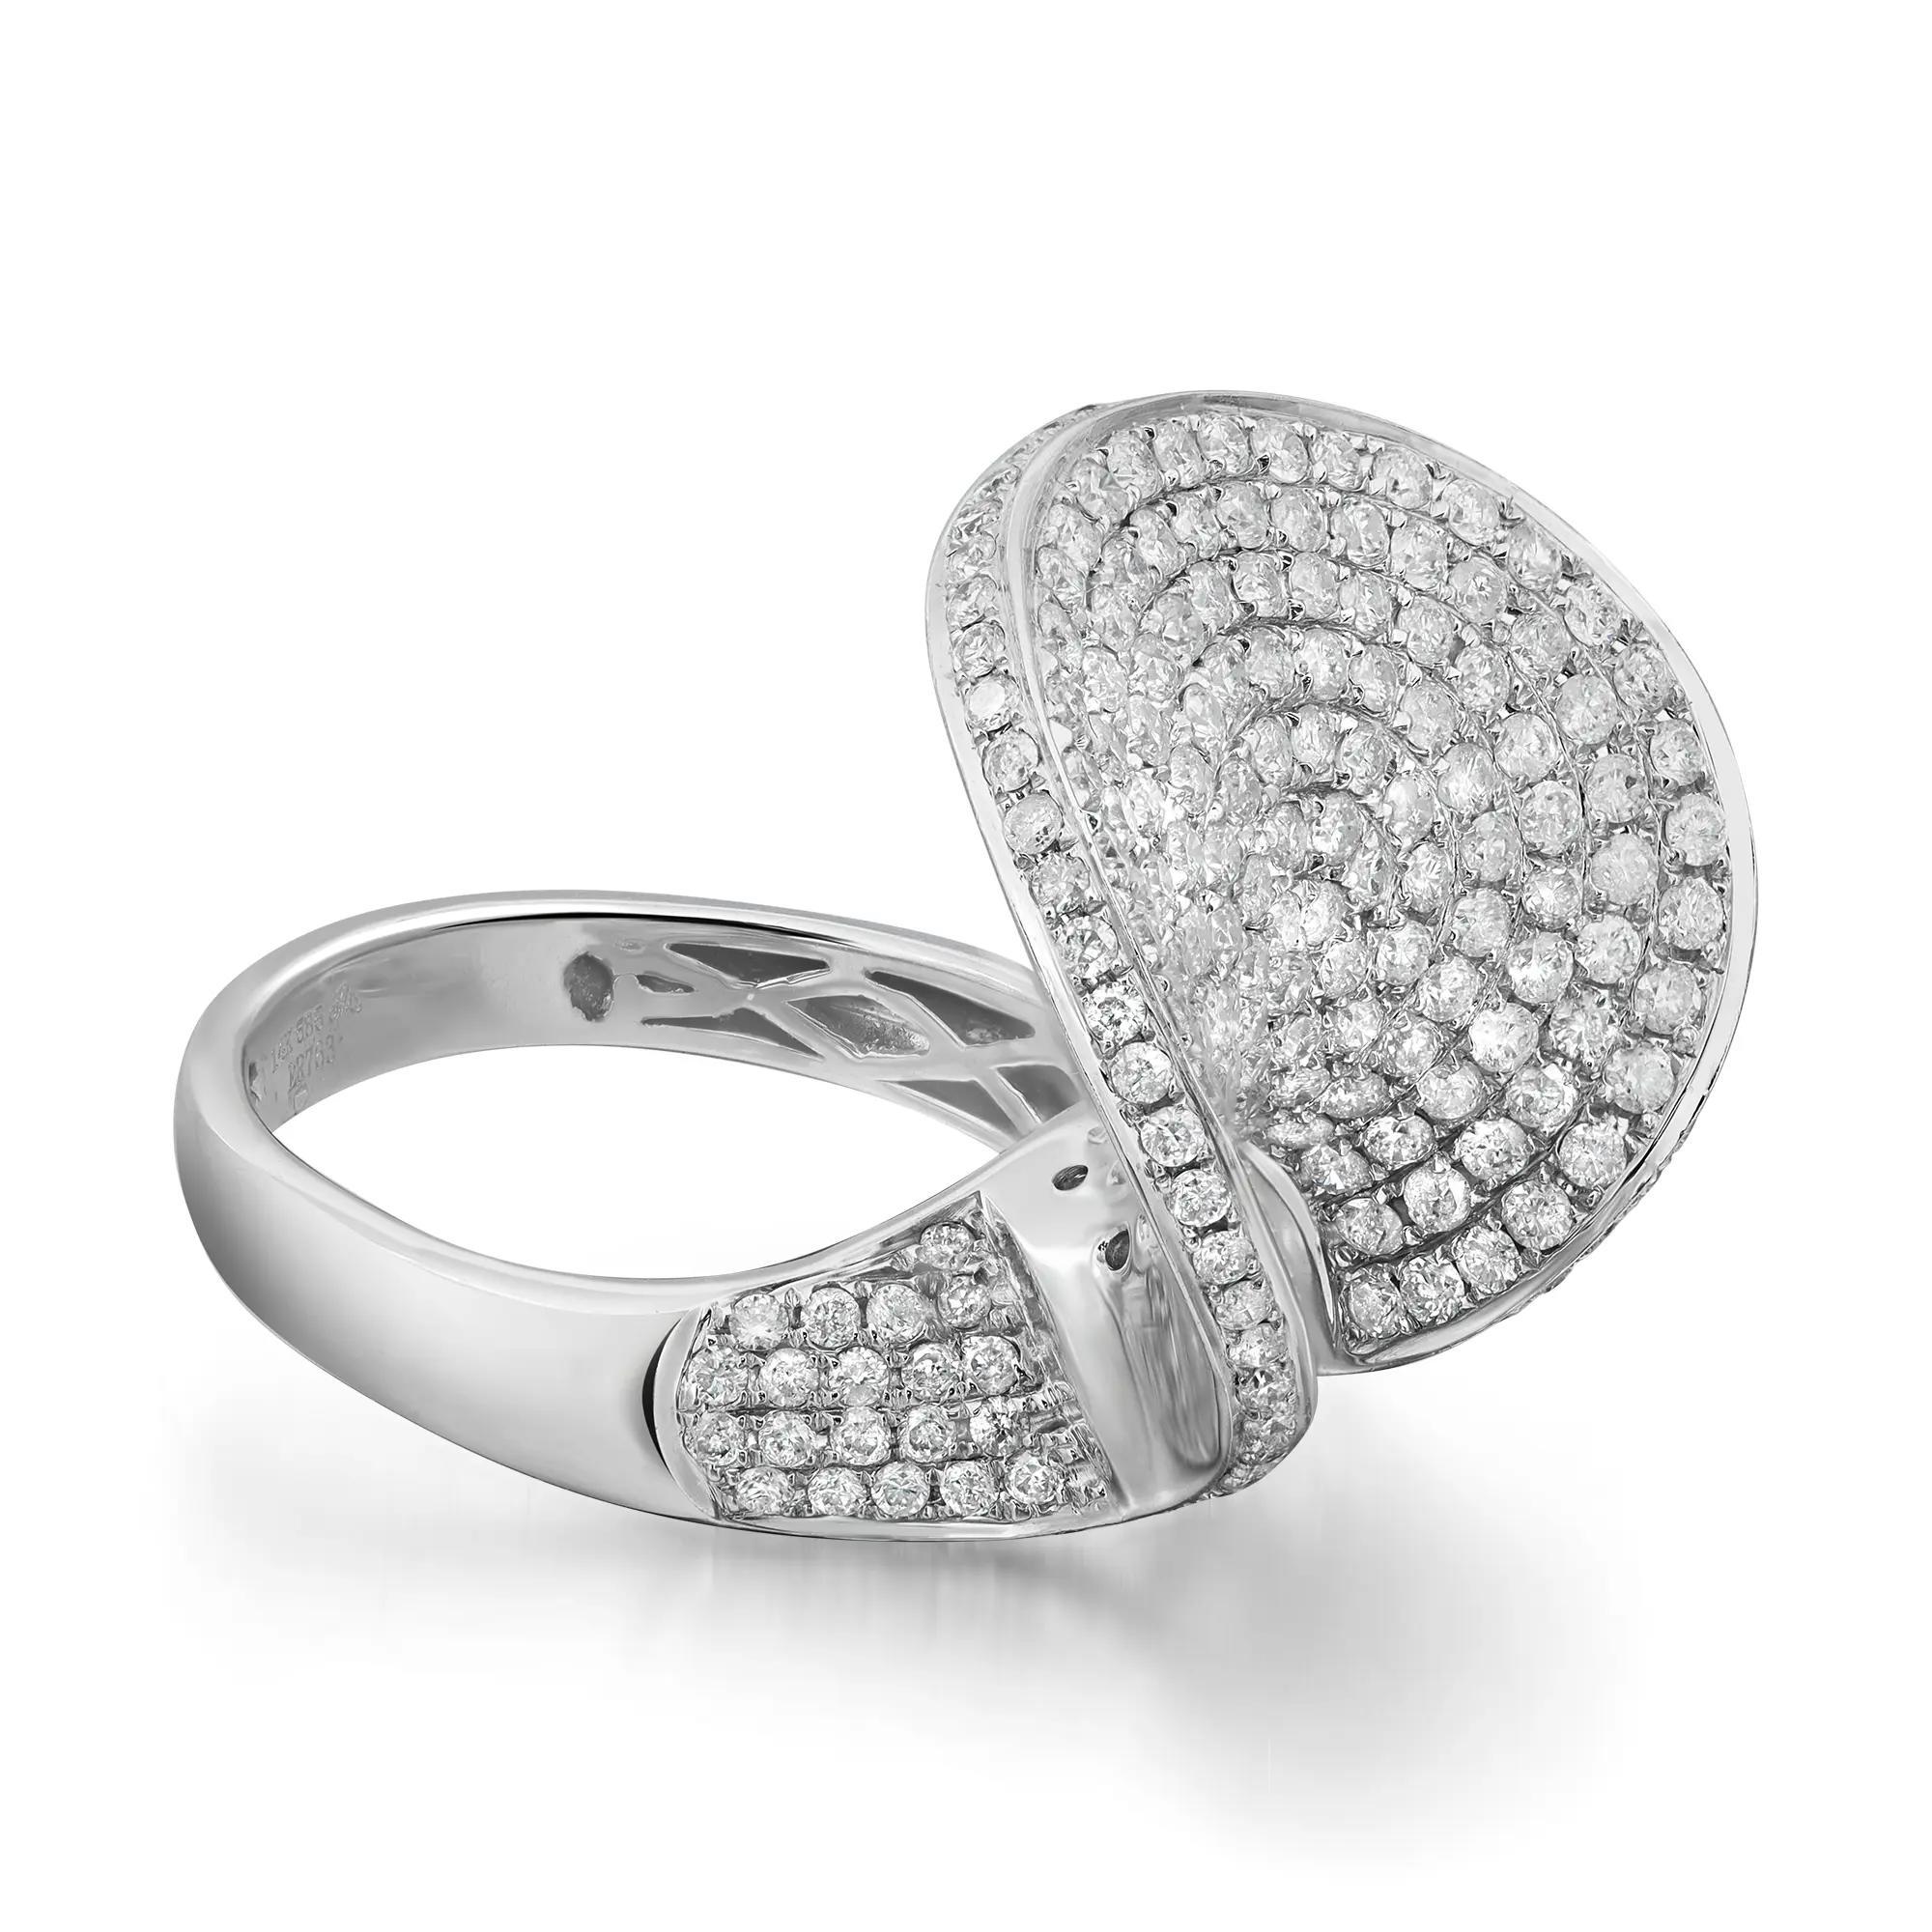 This bold and beautiful cocktail ring features pave set round cut diamonds weighing 2.32 carats. Crafted in 14k white gold, this ring exudes understated style and elegance. Diamond color I and SI1 clarity. Ring size 7.5. Total weight: 9.00 grams. A